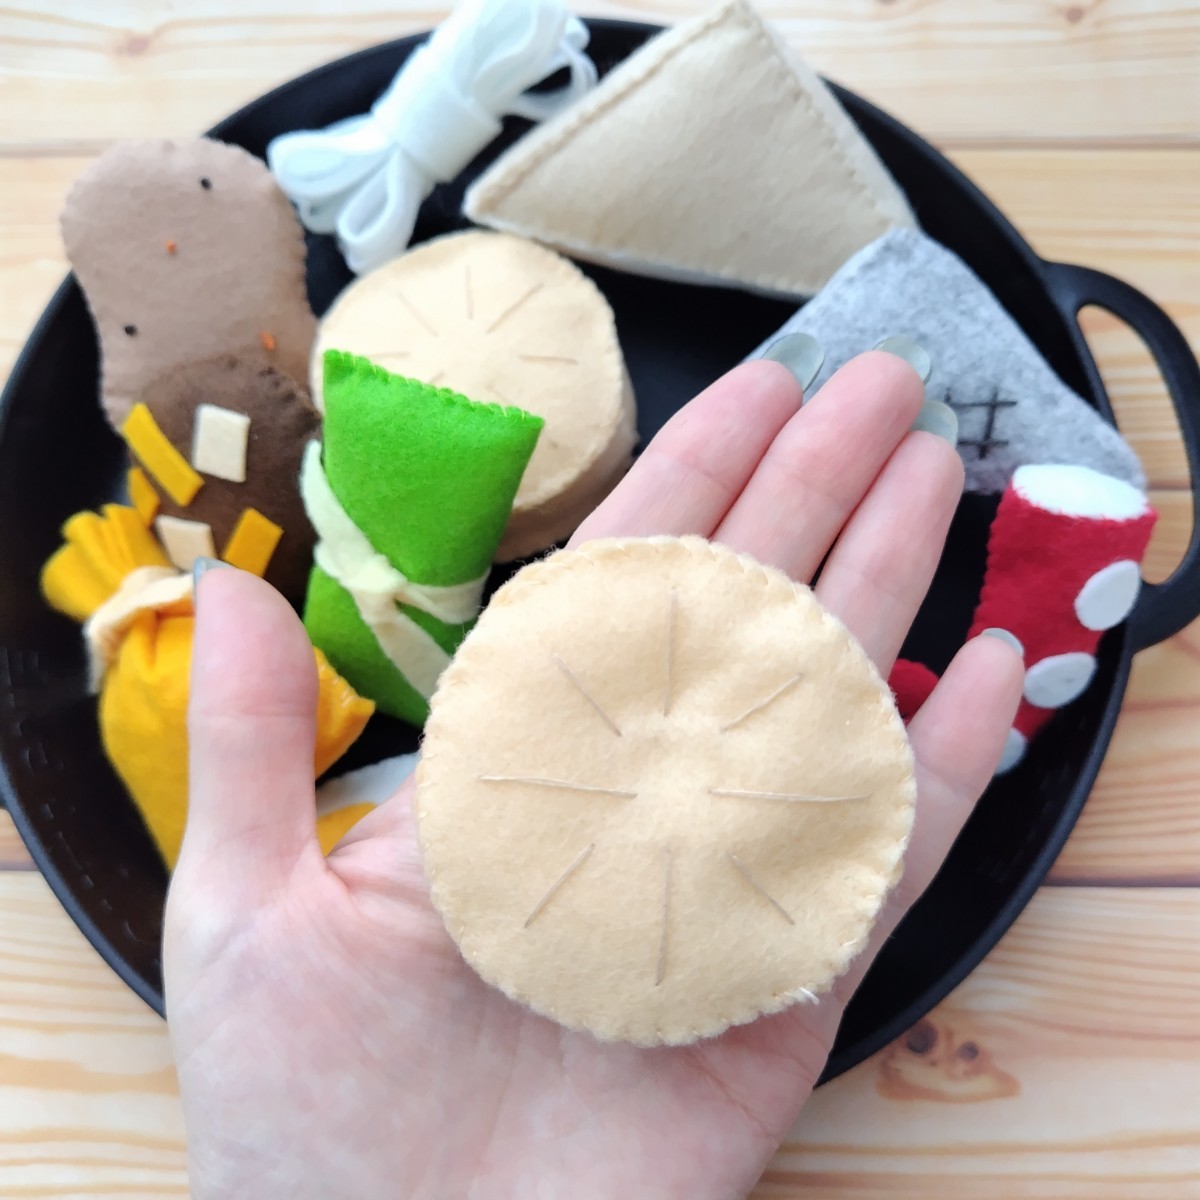  another another oden!13 piece set hand made felt ... toy intellectual training child care food ... game toy present display 